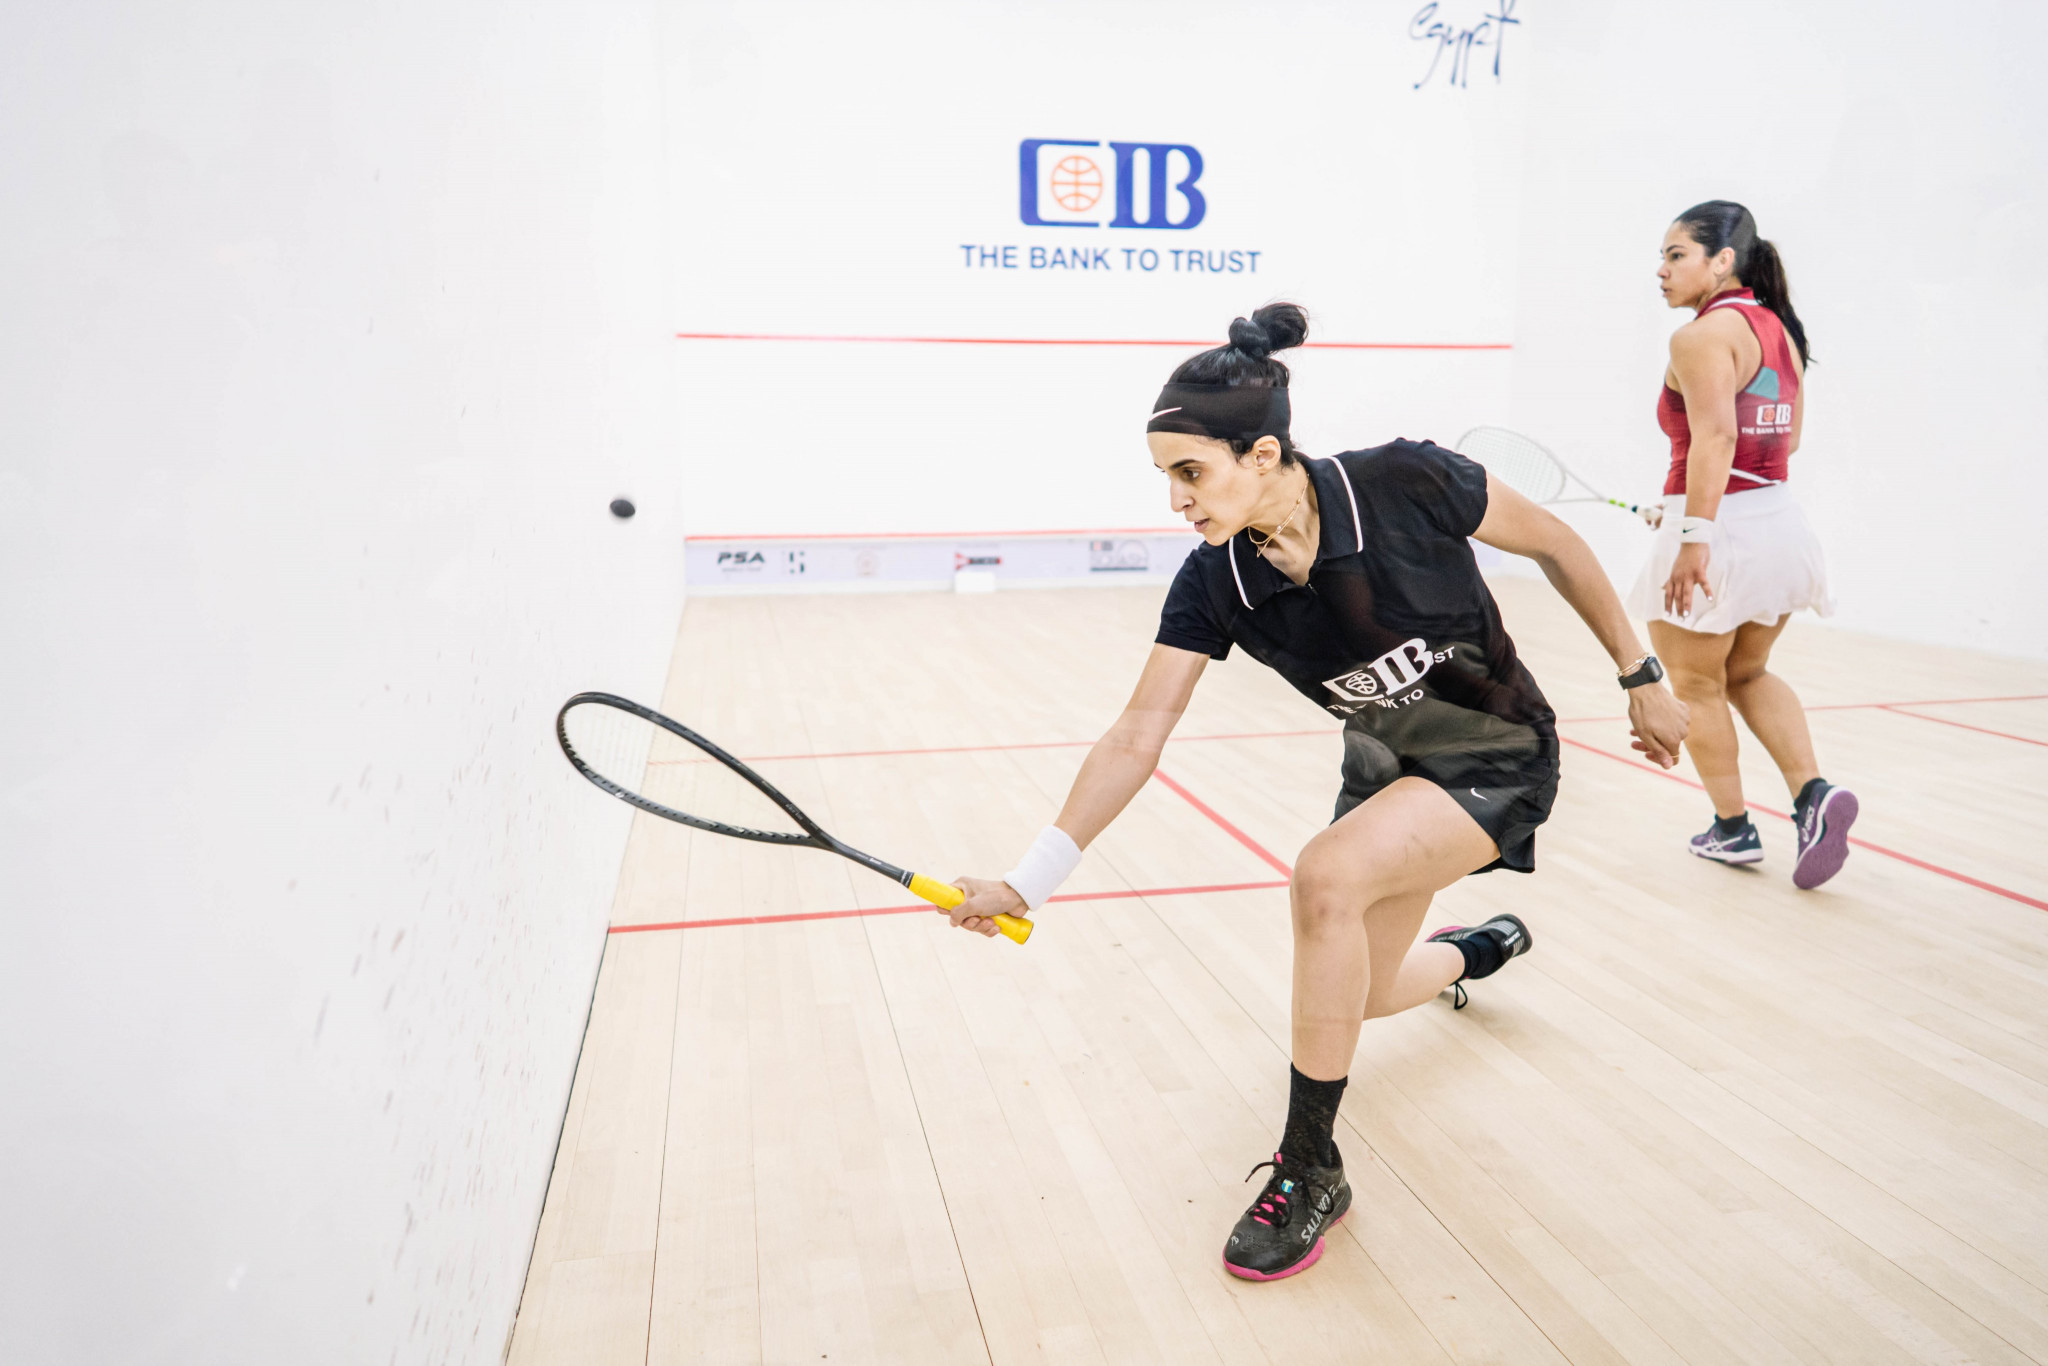 Nour El Tayeb knocked out seventh seed Salma Hany ©PSA